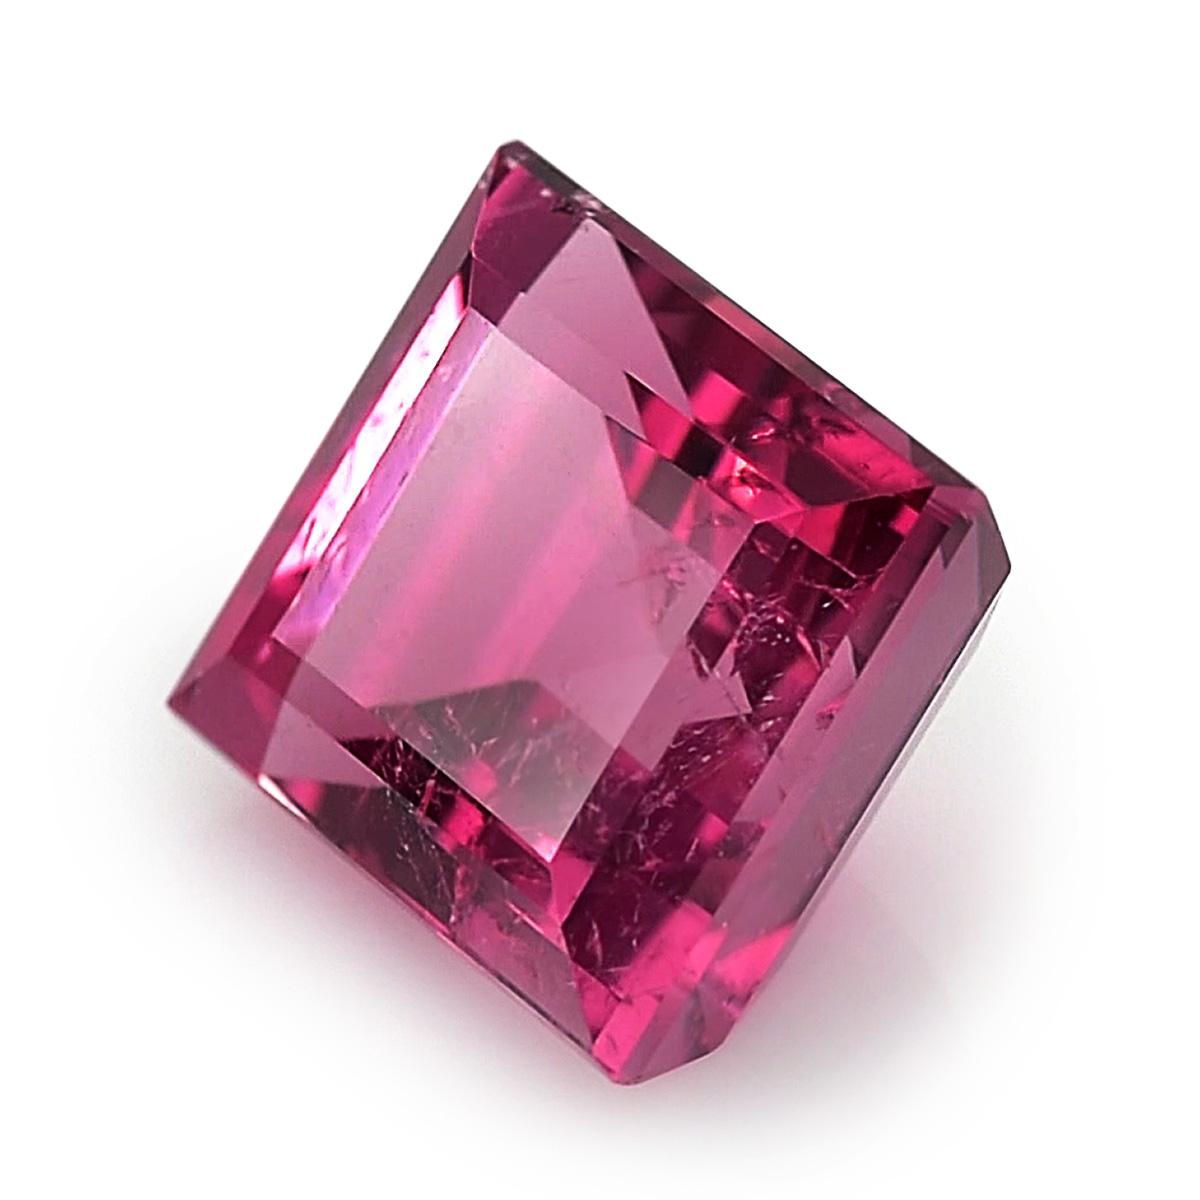 Identification: Natural Rubellite 4.88 carats 

Carat: 4.88 carats
Shape: Rectangle 
Measurements: 9.9 x 8.7 x 6.1 mm
Cut: Brilliant/Step
Color: Pink
Clarity: very eye clean

Introducing a magnificent natural Rubellite gemstone with a substantial